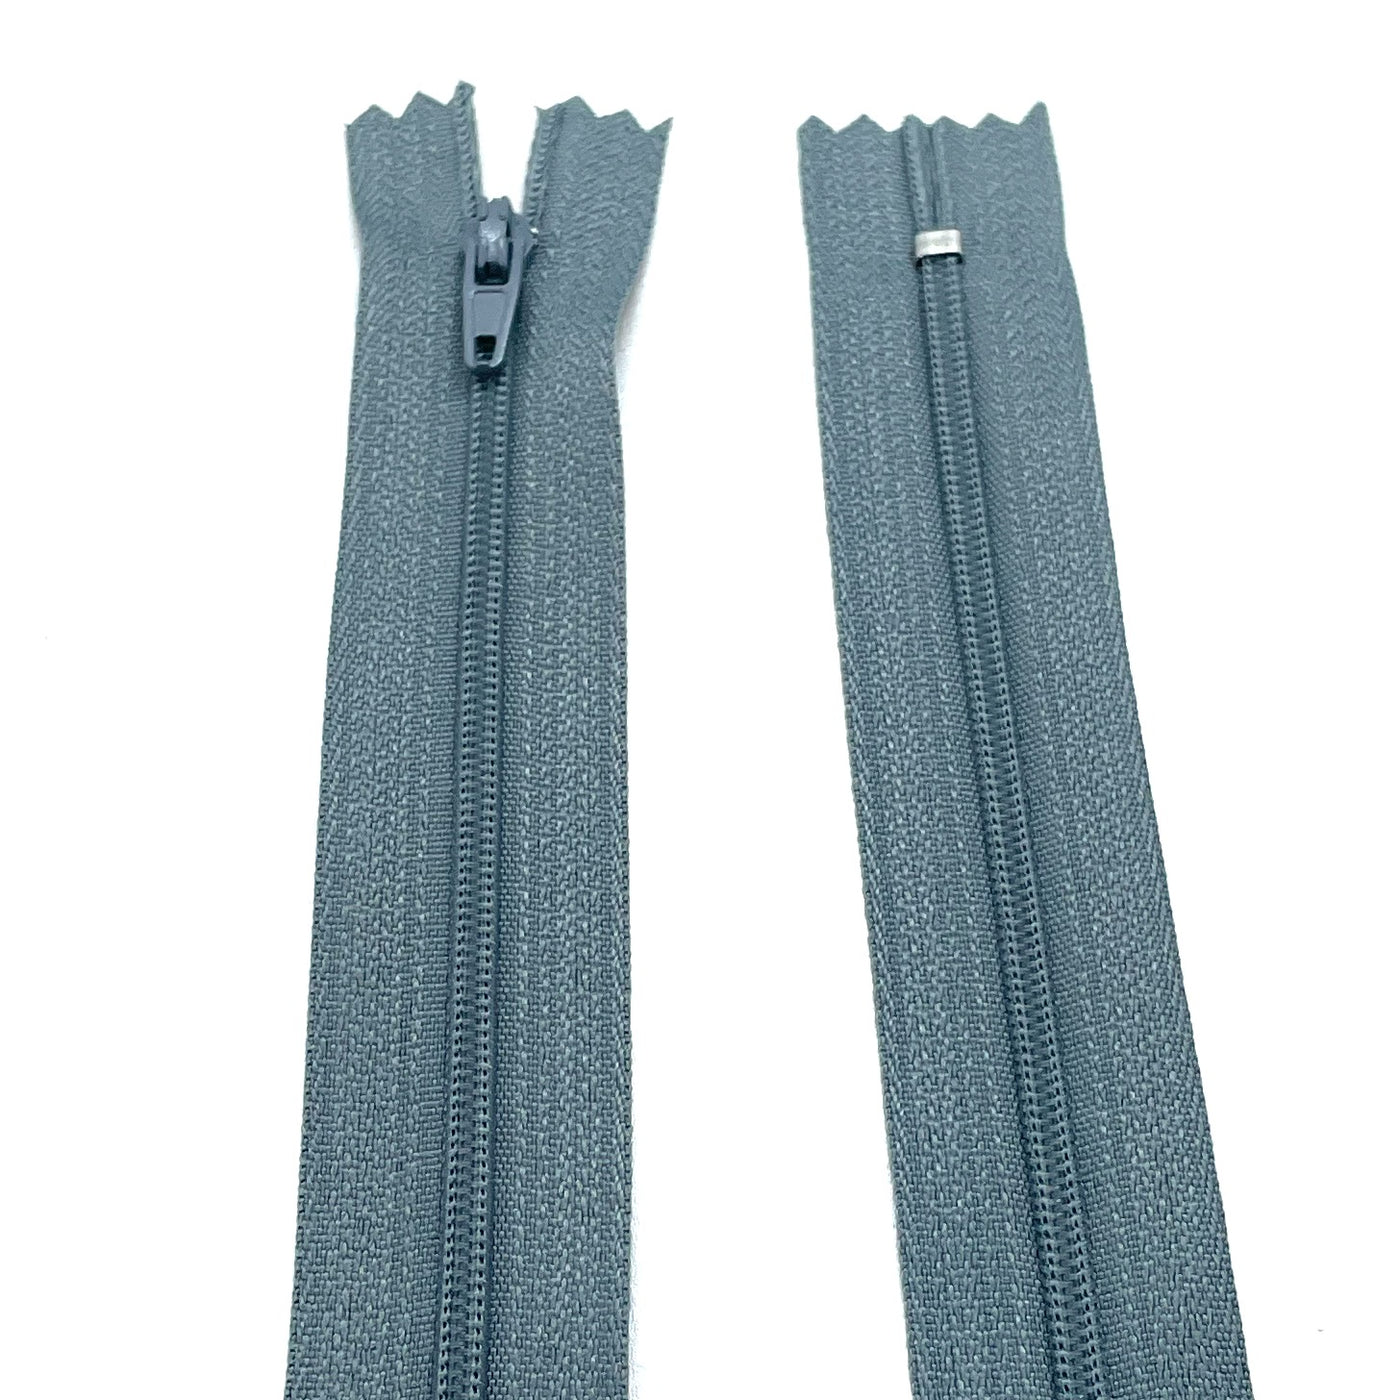 Photo of grey nylon zips available in 25 colors and 5 sizes. Excellent quality zippers for craft and dressmaking purposes. Perfect for dresses, skirts, trousers, bags, purses, cushions, and numerous other projects. So many possibilities, so little time!